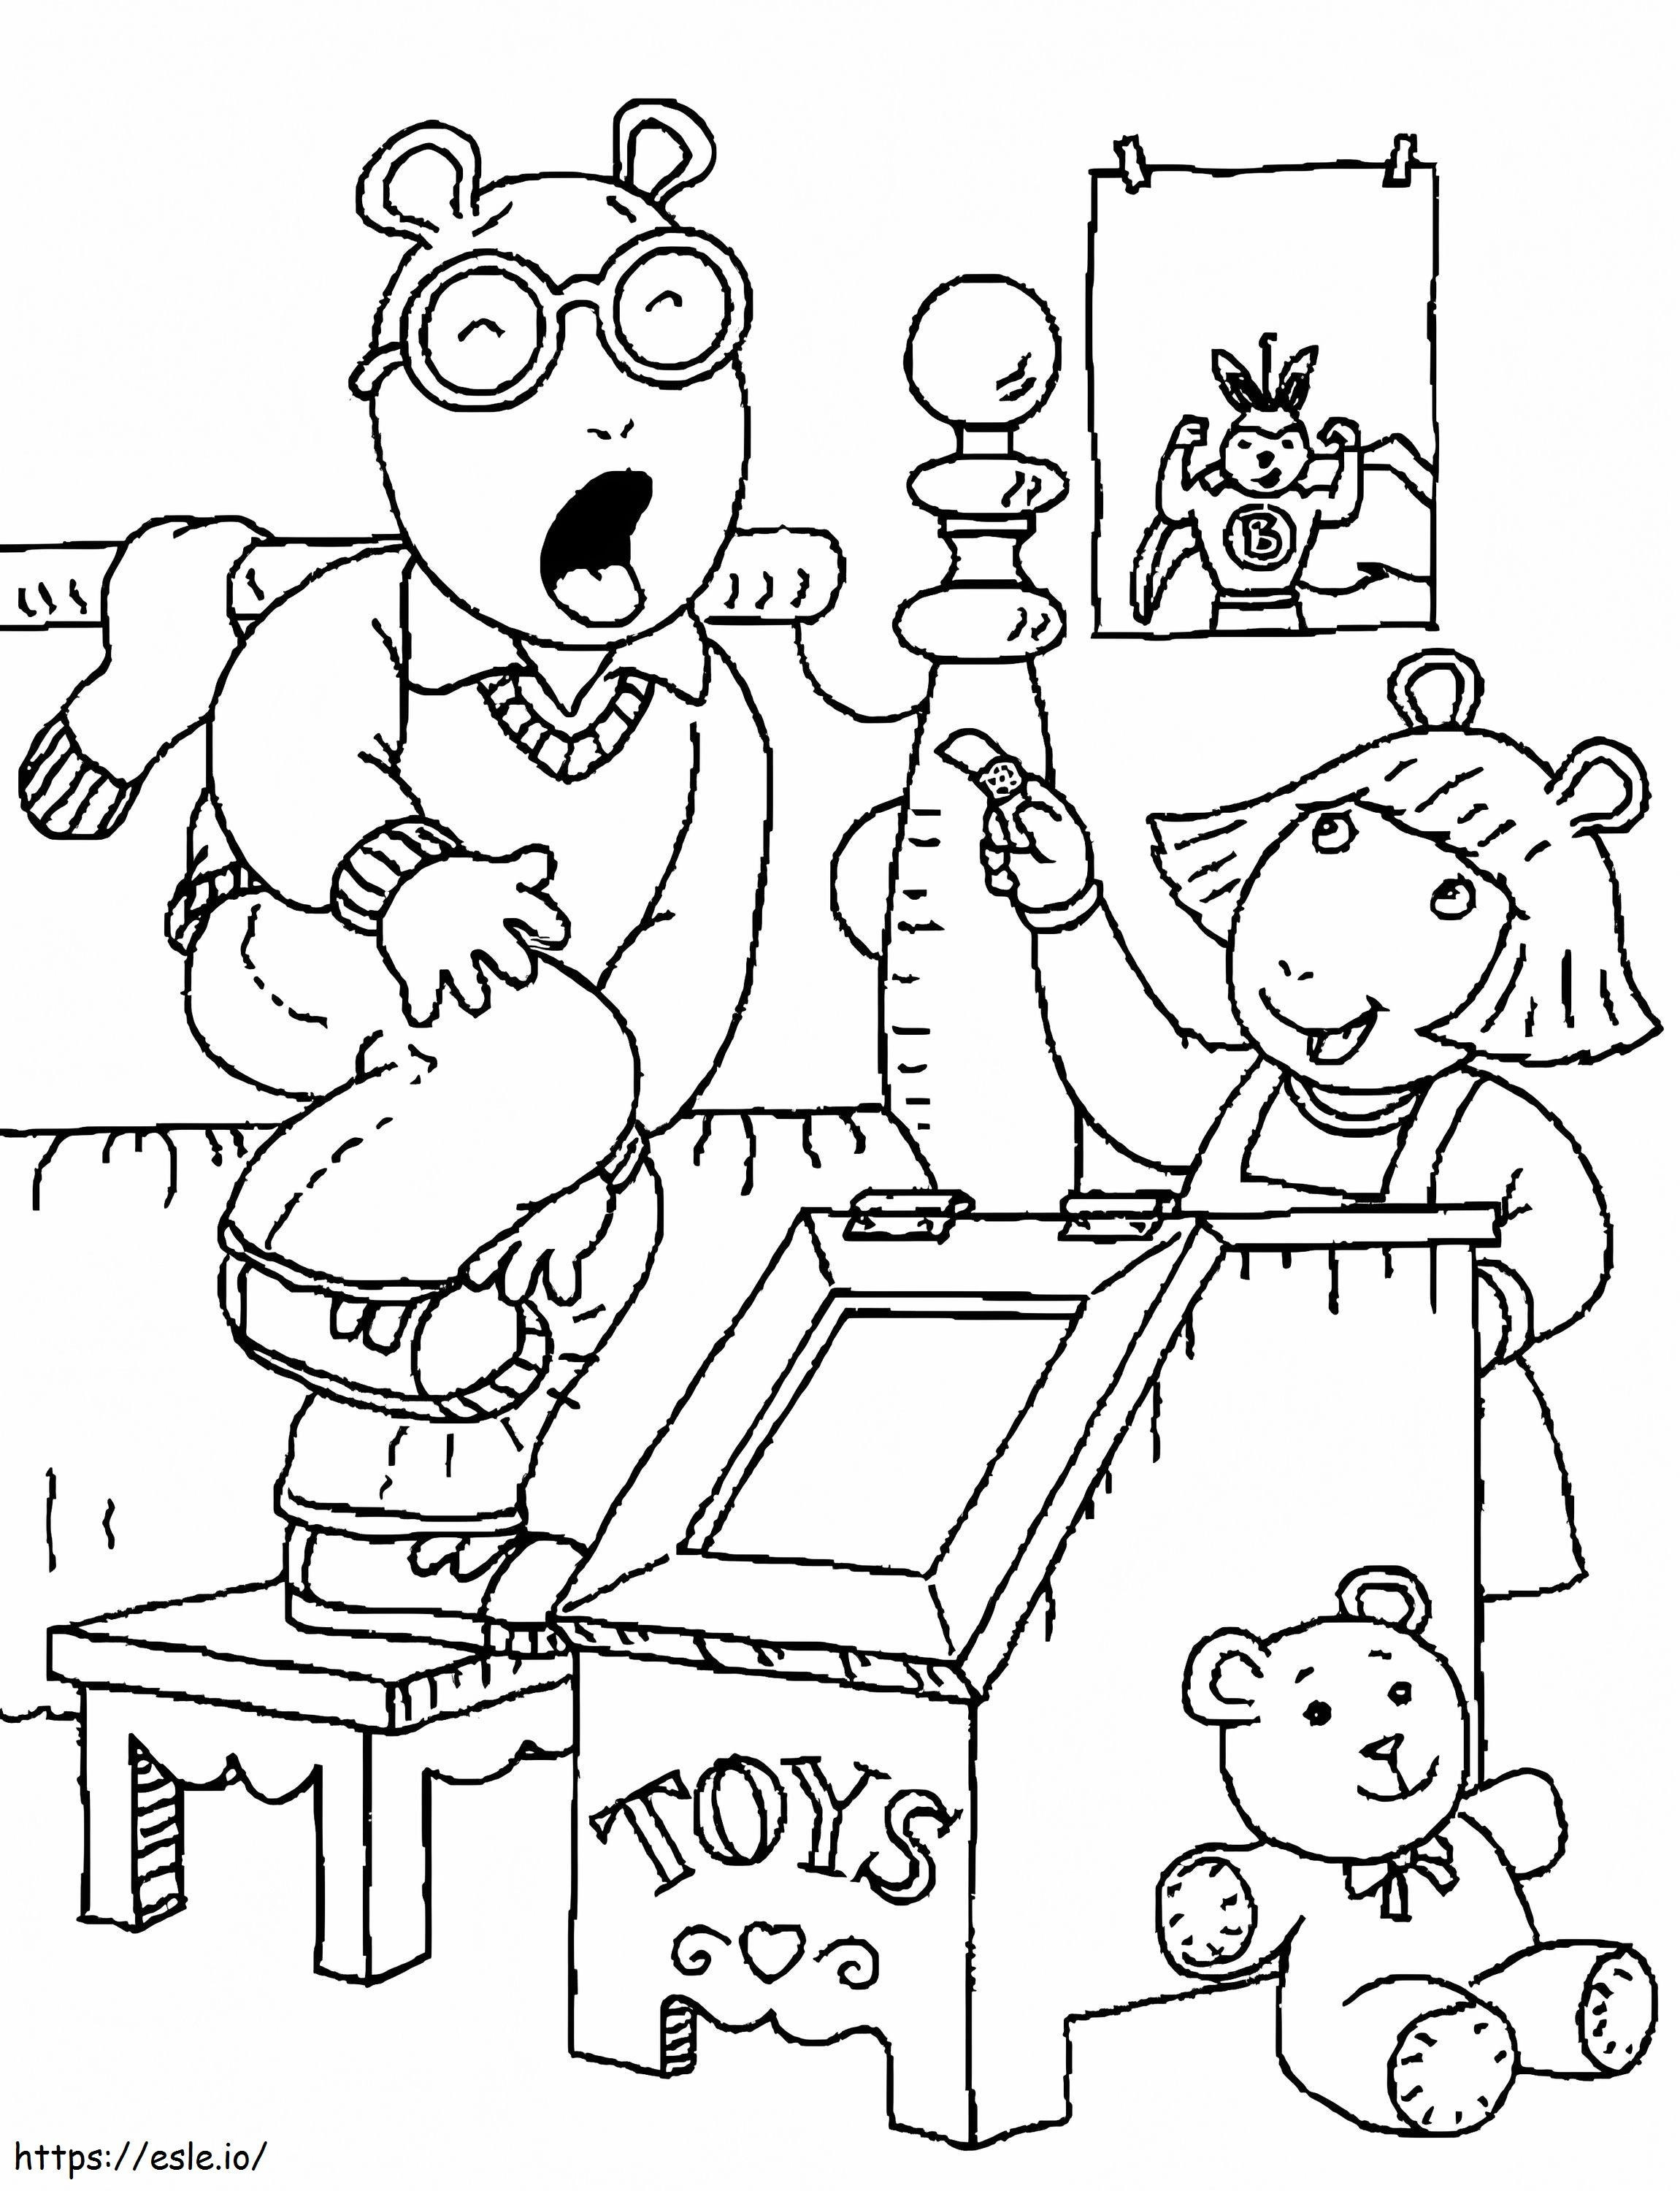 Arthur Read In Pain coloring page